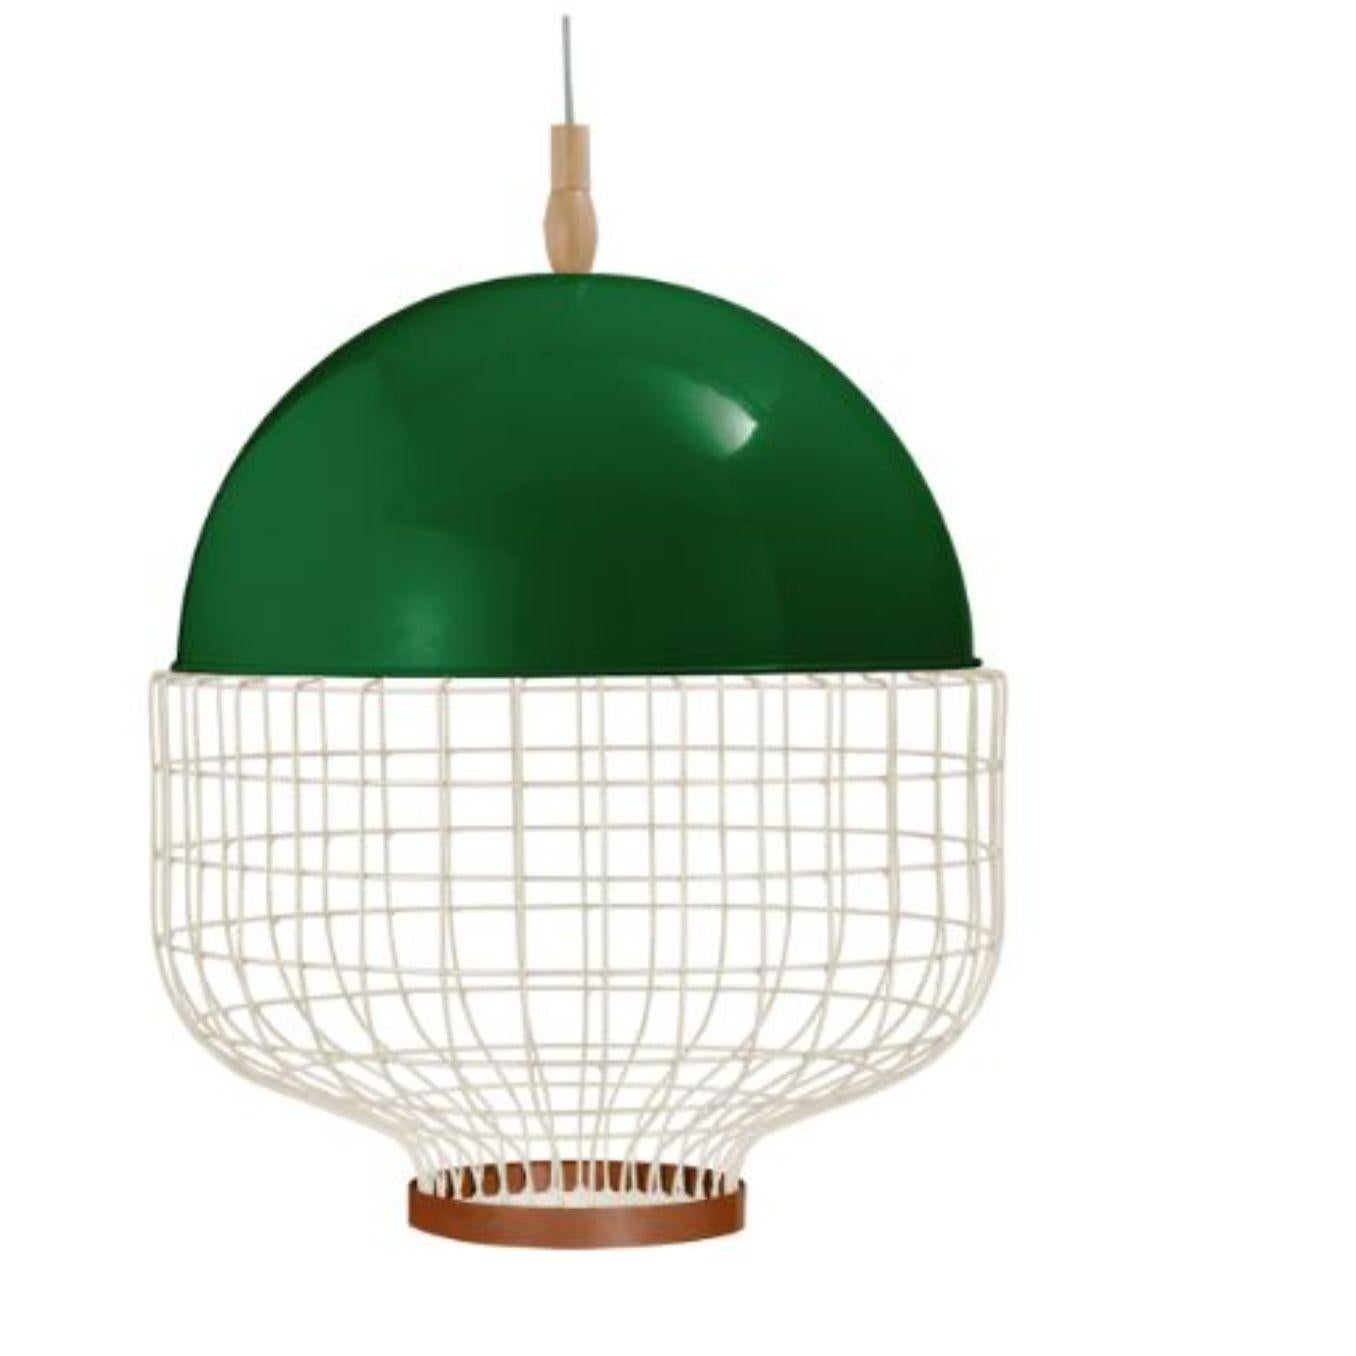 Emerald Magnolia suspension lamp with copper ring by Dooq.
Dimensions: W 65 x D 65 x H 68 cm
Materials: lacquered metal, polished or brushed metal, copper.
Also available in different colours and materials. 

Information:
230V/50Hz
E27/1x20W